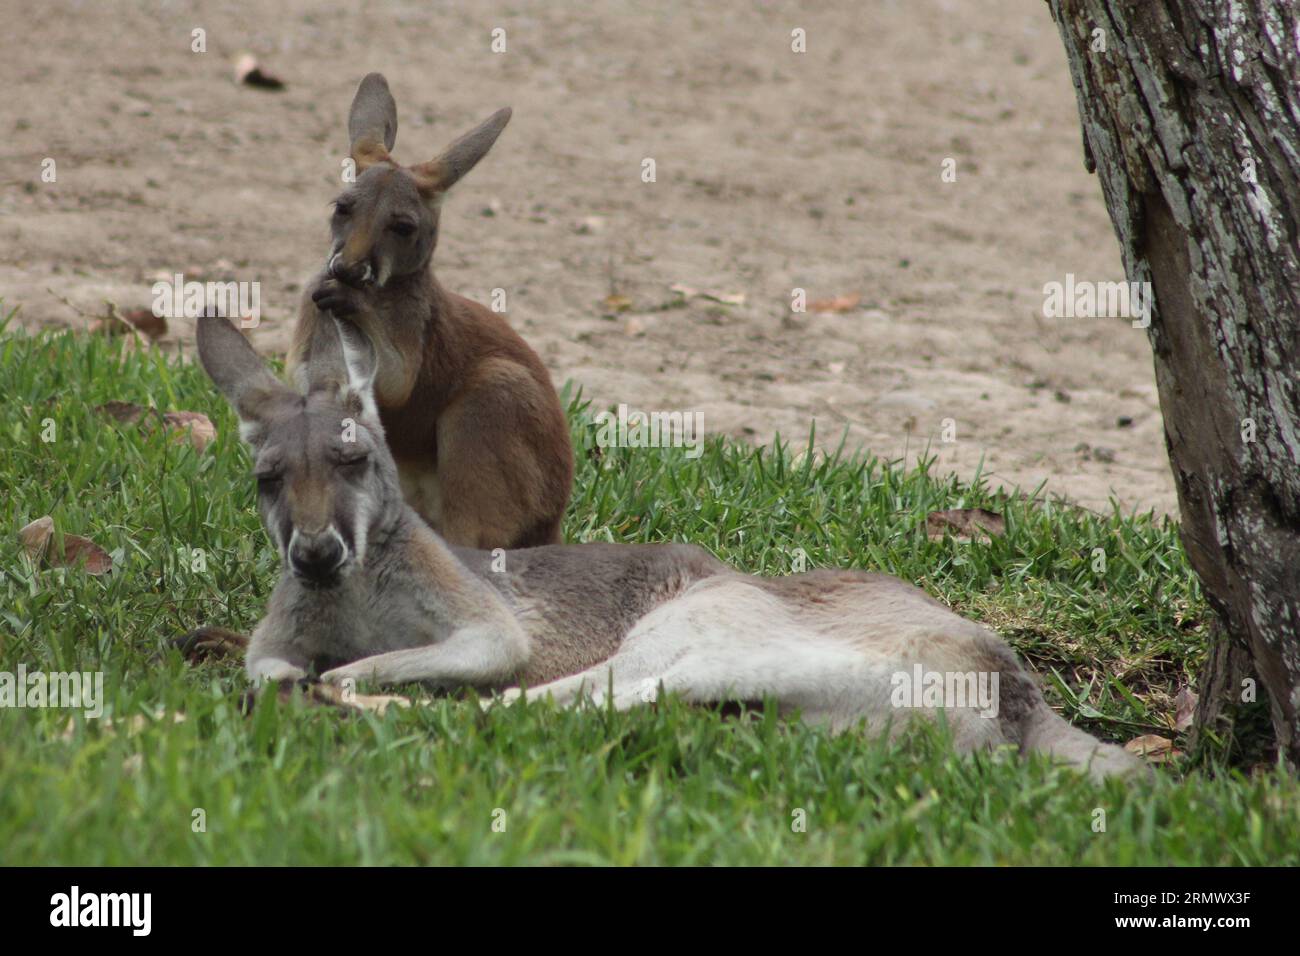 LIMA, Nov. 12, 2014 -- A female kangaroo and her offspring rest during the framework of the week of the conservation and management of animal life in the Park of the Legends, San Miguel district, department of Lima, Peru, on Nov. 12, 2014. The Park of the Legends celebrates the week of the conservation and management of the animal life. Luis Camacho) (jp) PERU-LIMA-ENVIRONMENT-FAUNA e LuisxCamacho PUBLICATIONxNOTxINxCHN   Lima Nov 12 2014 a Female Kangaroo and her Offspring Rest during The FRAMEWORK of The Week of The Conservation and Management of Animal Life in The Park of The Legends San Mi Stock Photo